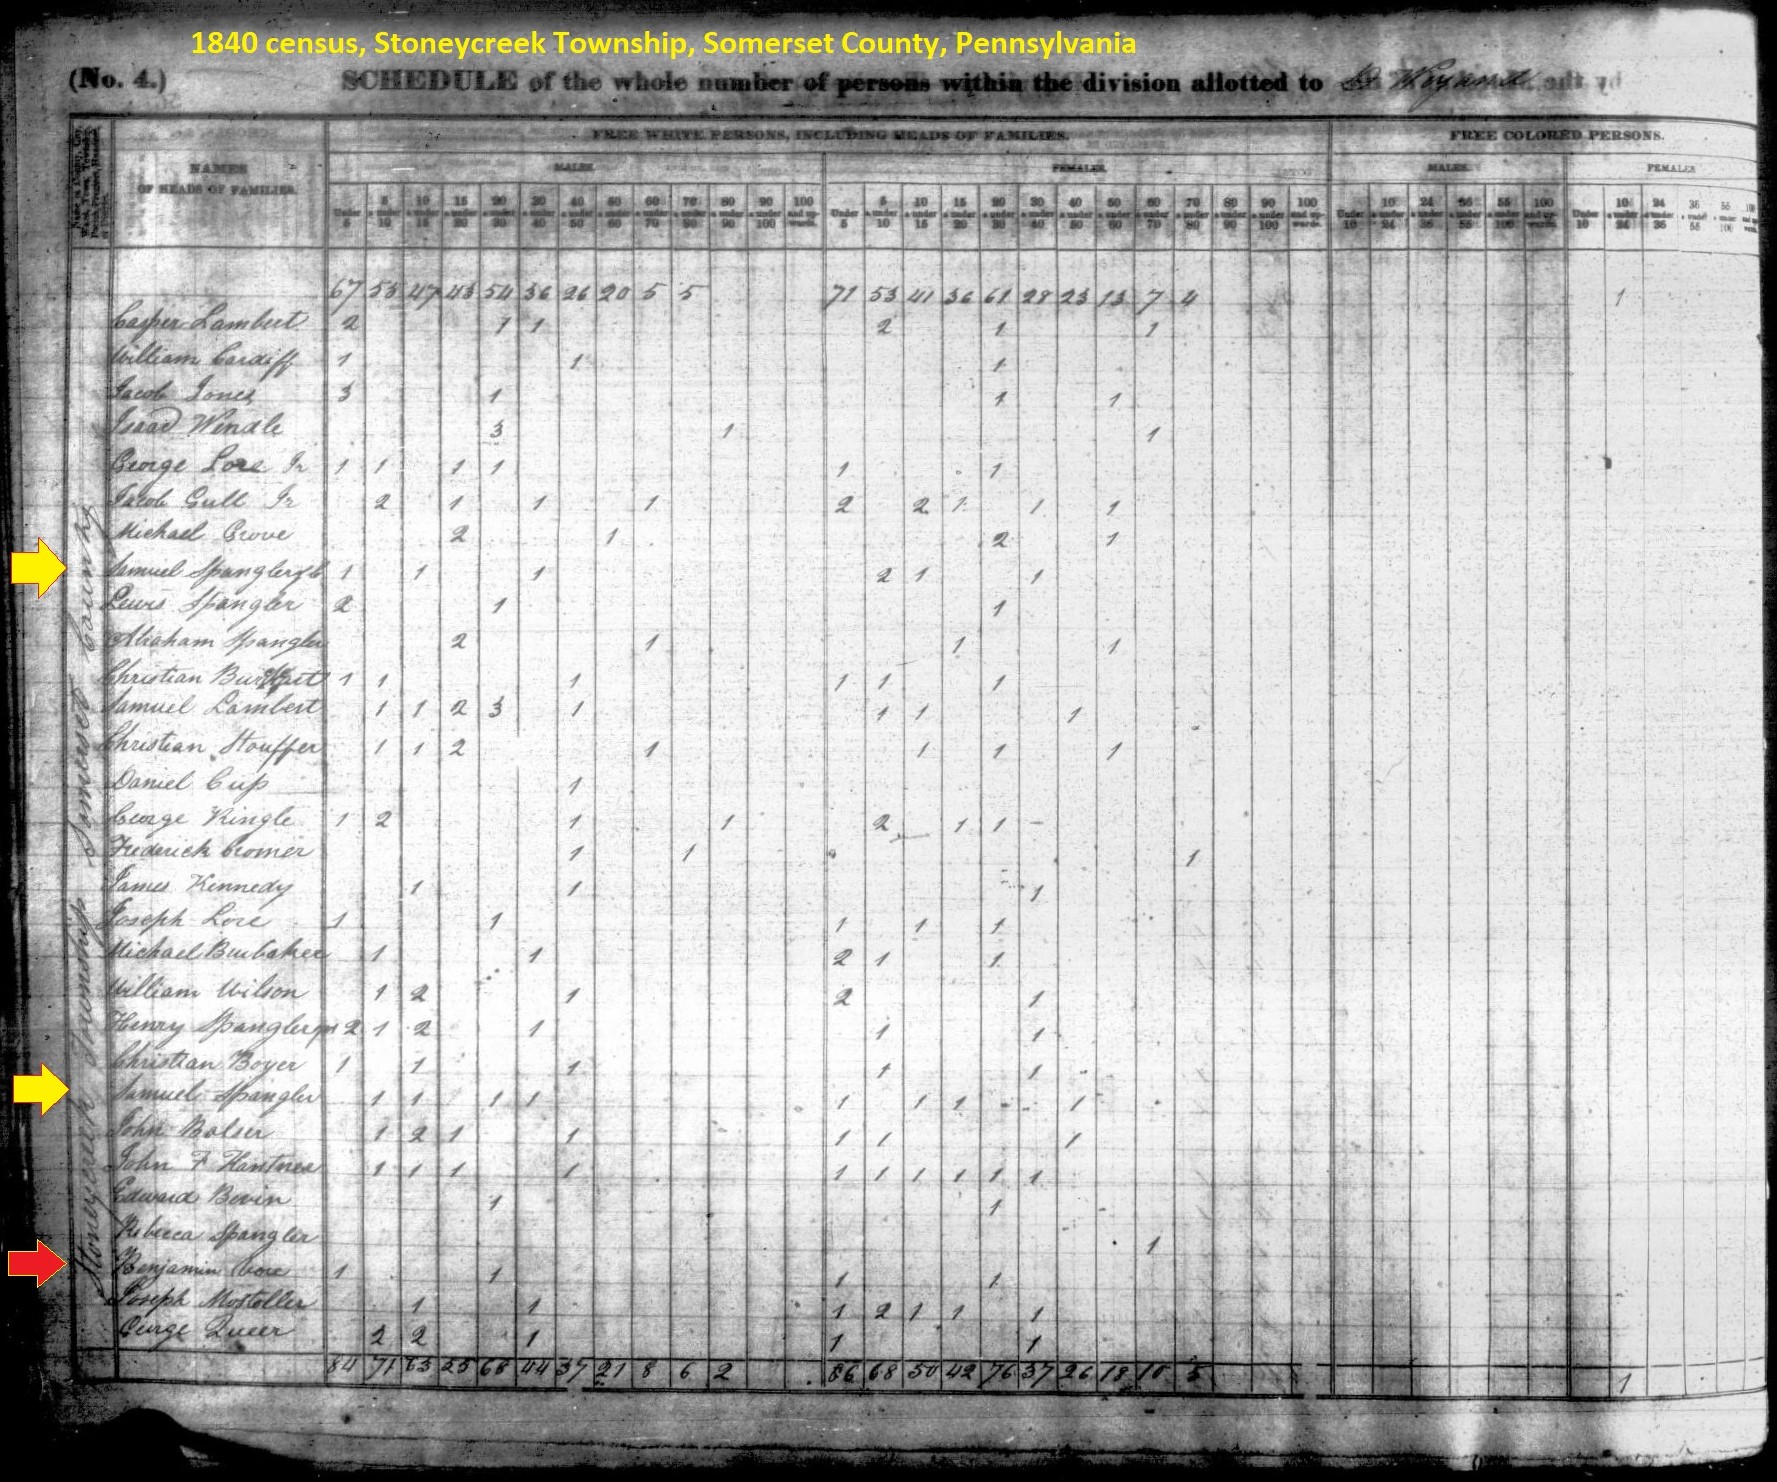 There are two individuals named Samuel Spangler in this copy of a sheet from the 1840 census of Somerset County, Pennsylvania. 